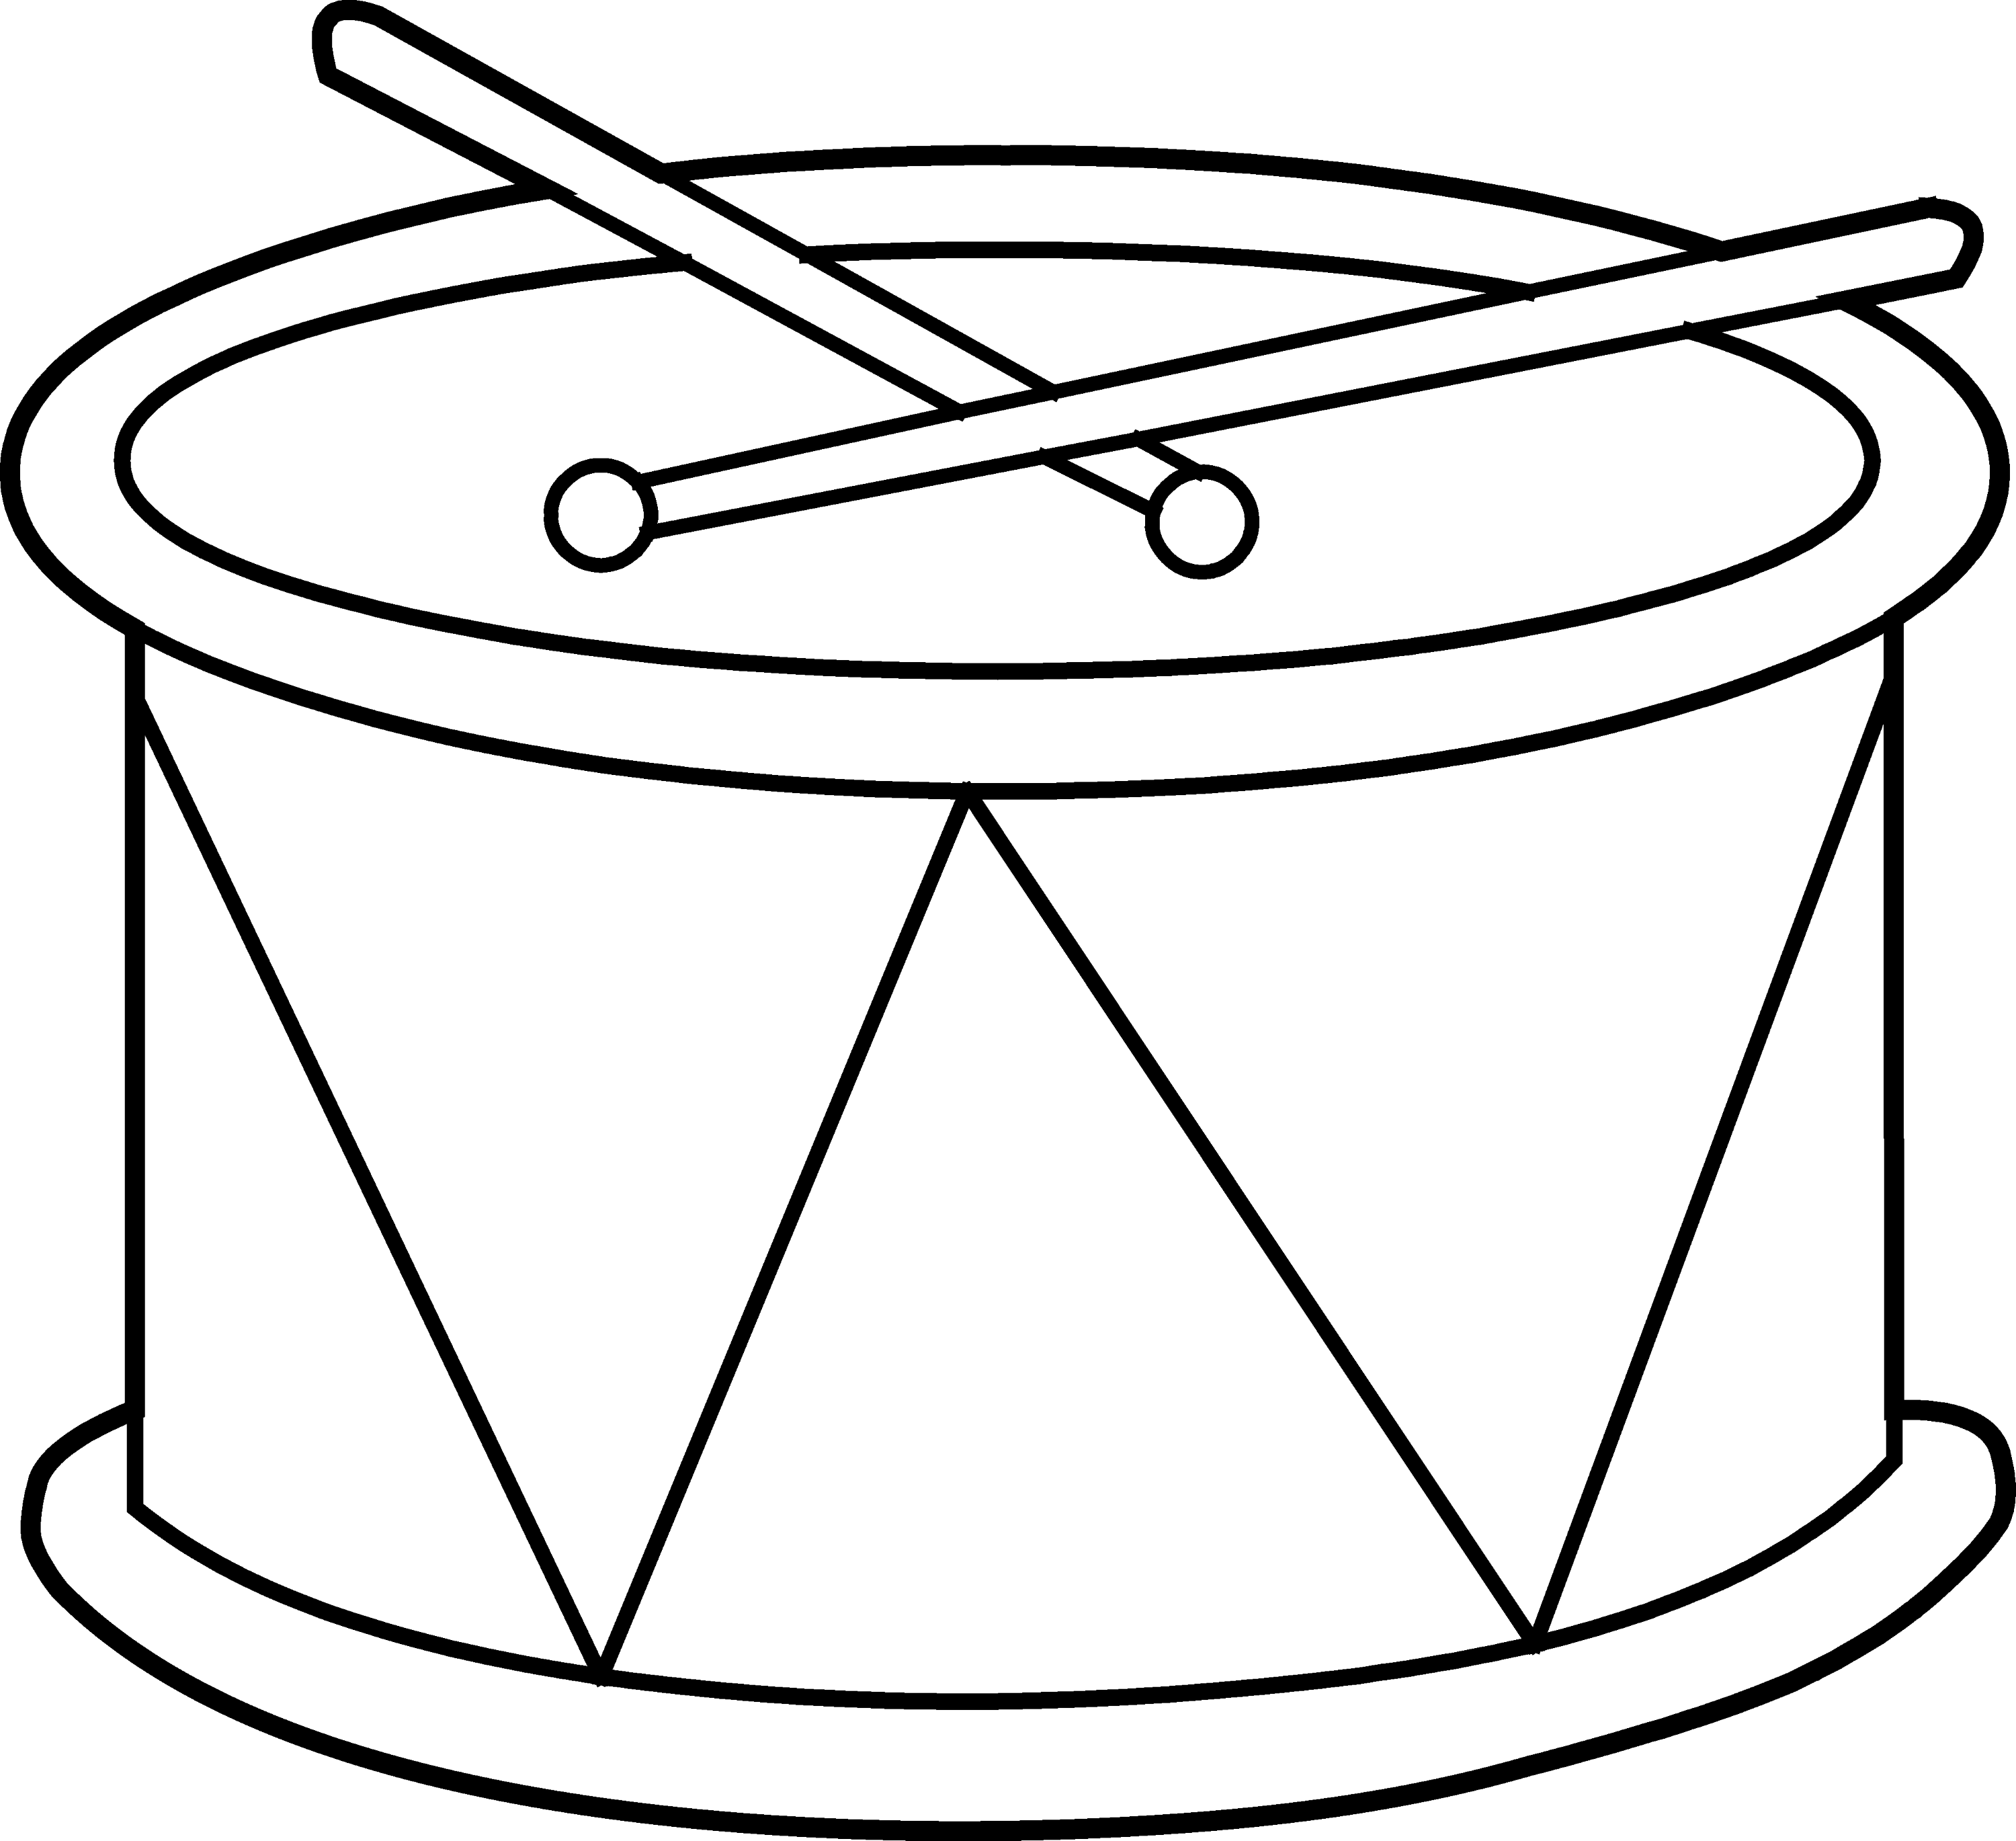 snare-drums-coloring-page-free-printable-coloring-pages